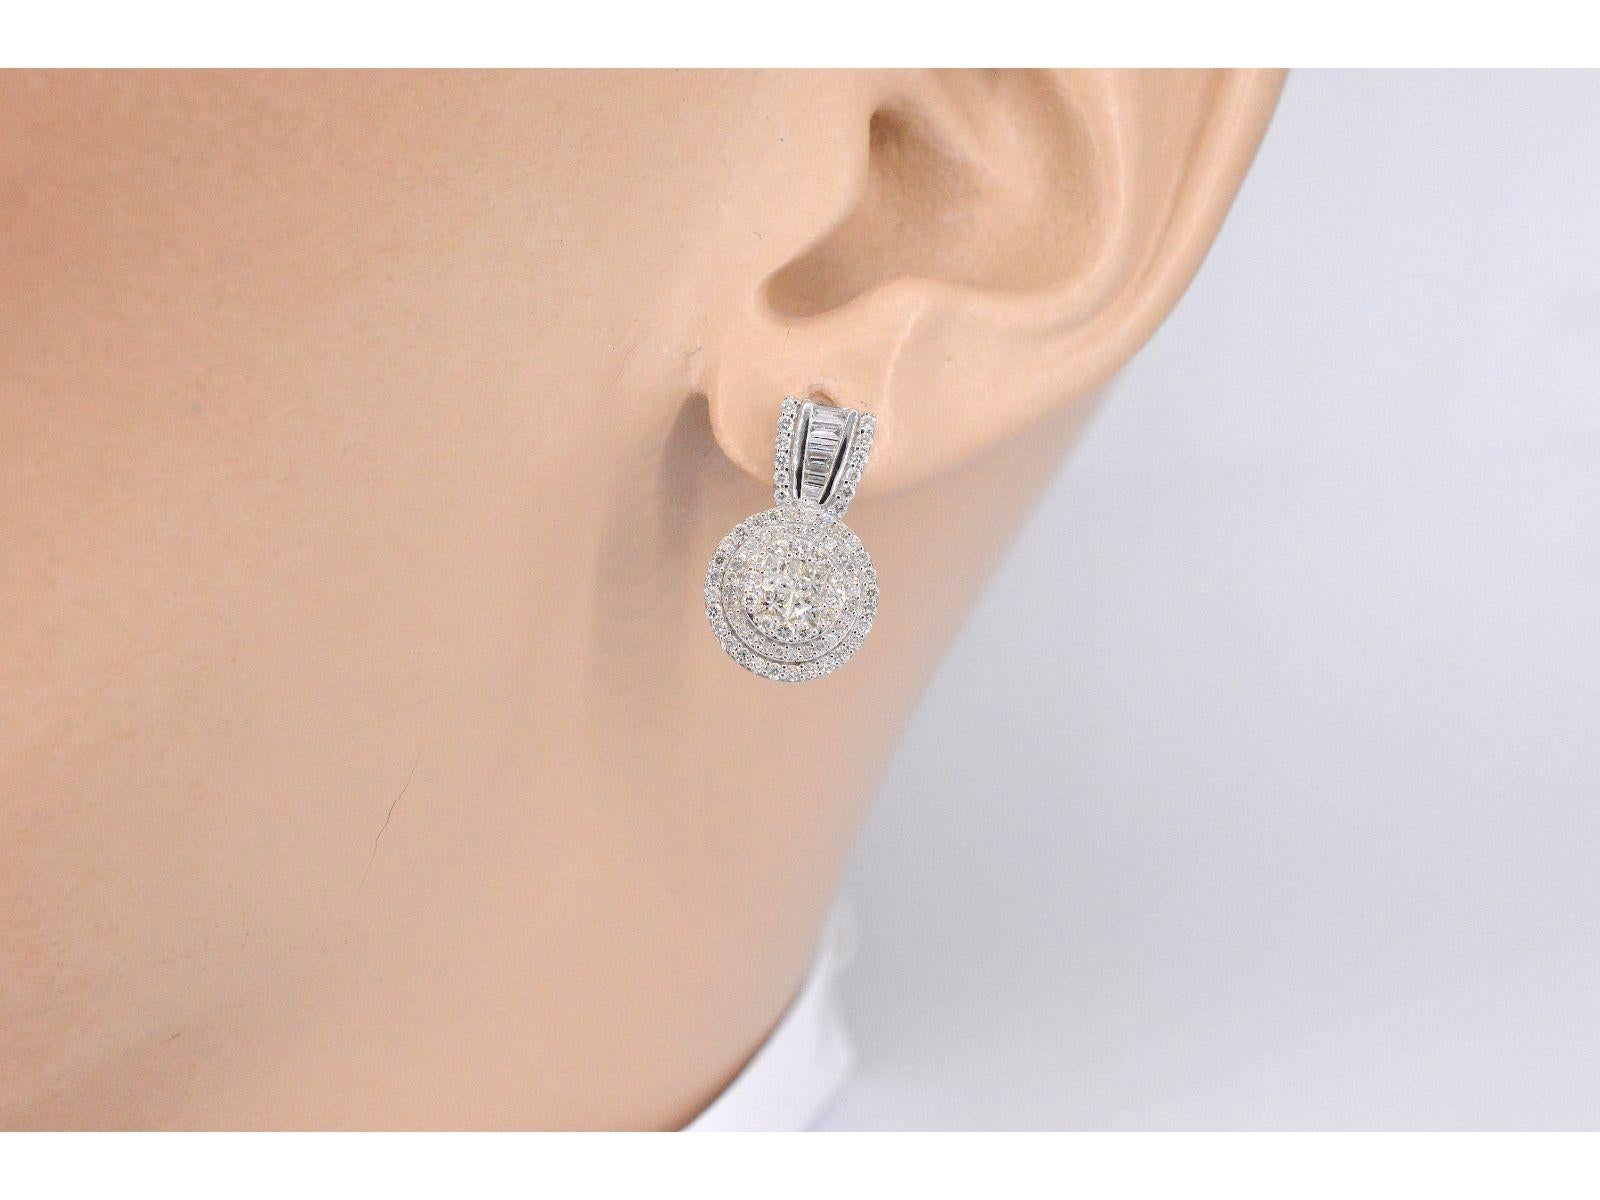 

Diamonds
Weight: 1.00 carat
Cut: Brilliant, princess, baguette and round cut
Colour: F-G
Clarity: SI-P
Quality: Very good

Jewel: Earrings
Weight: 3.8 gram
Hallmark: 14 karat 
Measurement: 17 mm
Condition: New

Retail value: € 3.000

